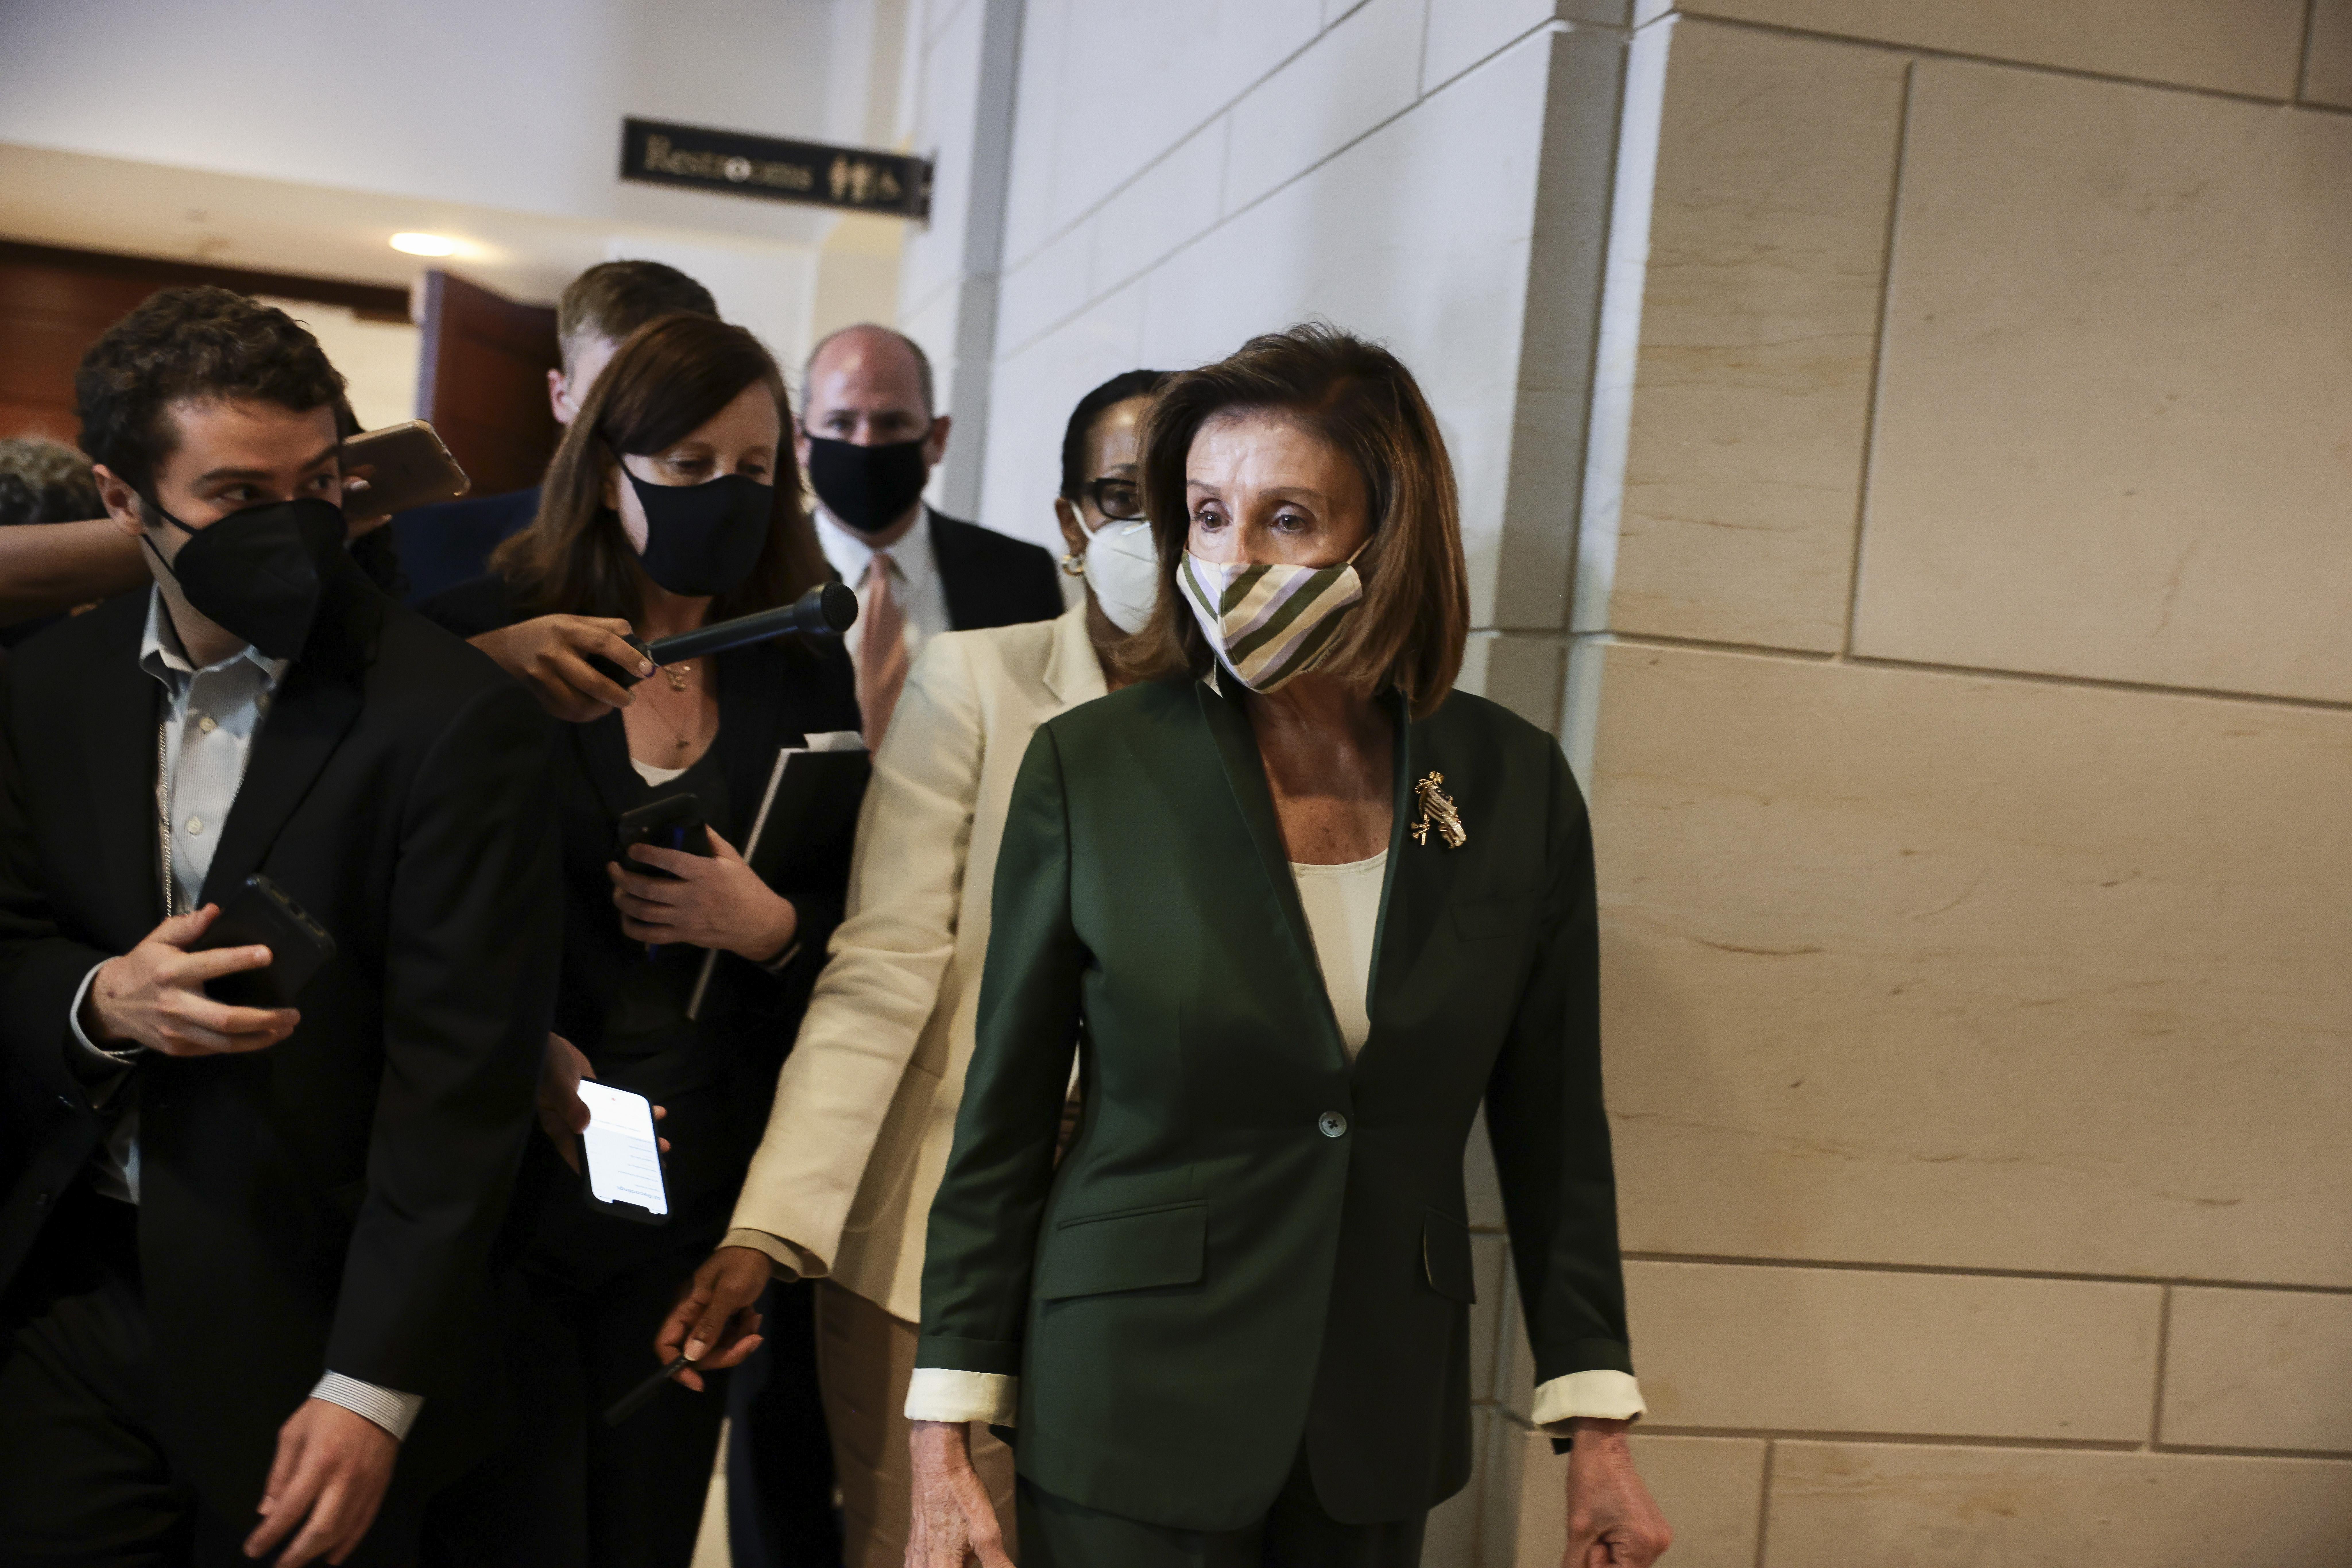 House Speaker Nancy Pelosi walking in the Capitol building, followed by reporters as she departs from a classified briefing held by U.S. Capitol Police Chief J. Thomas Manger to brief congressional leaders on the security preparations for a rally taking place on Capitol Hill.